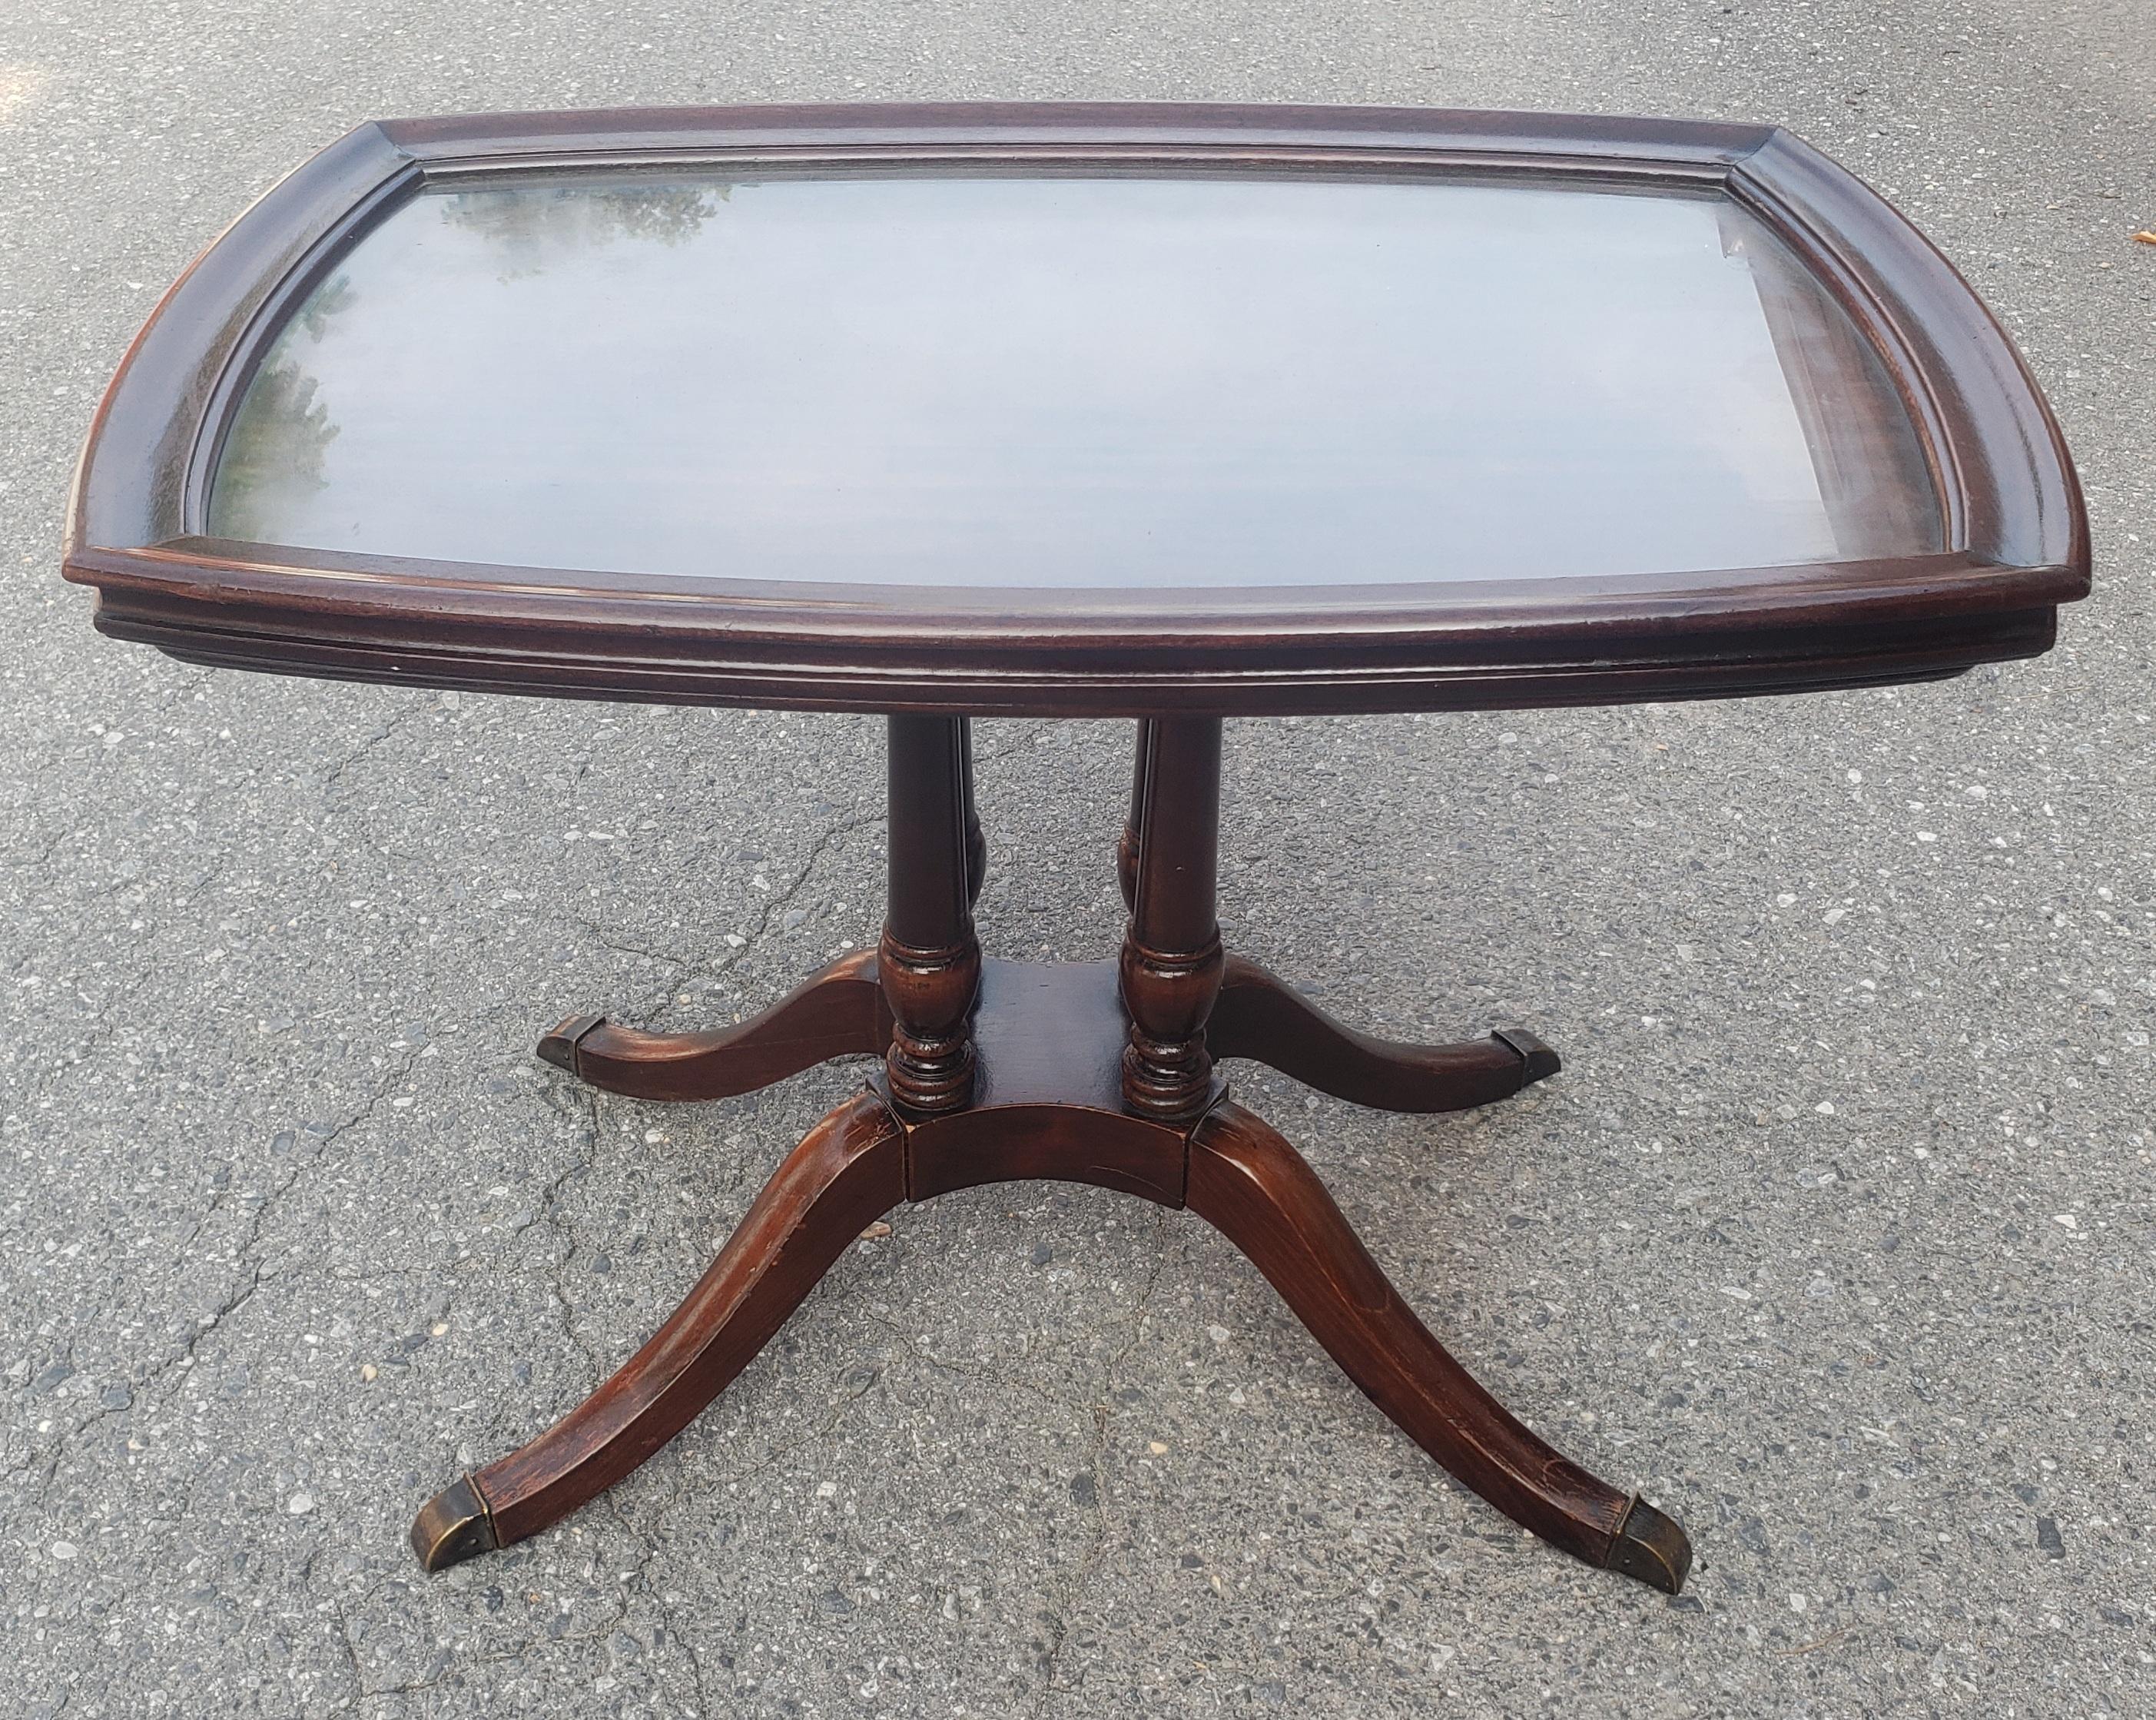 1940s Brandt Furniture Mahogany Side Table with Glass Tray For Sale 3